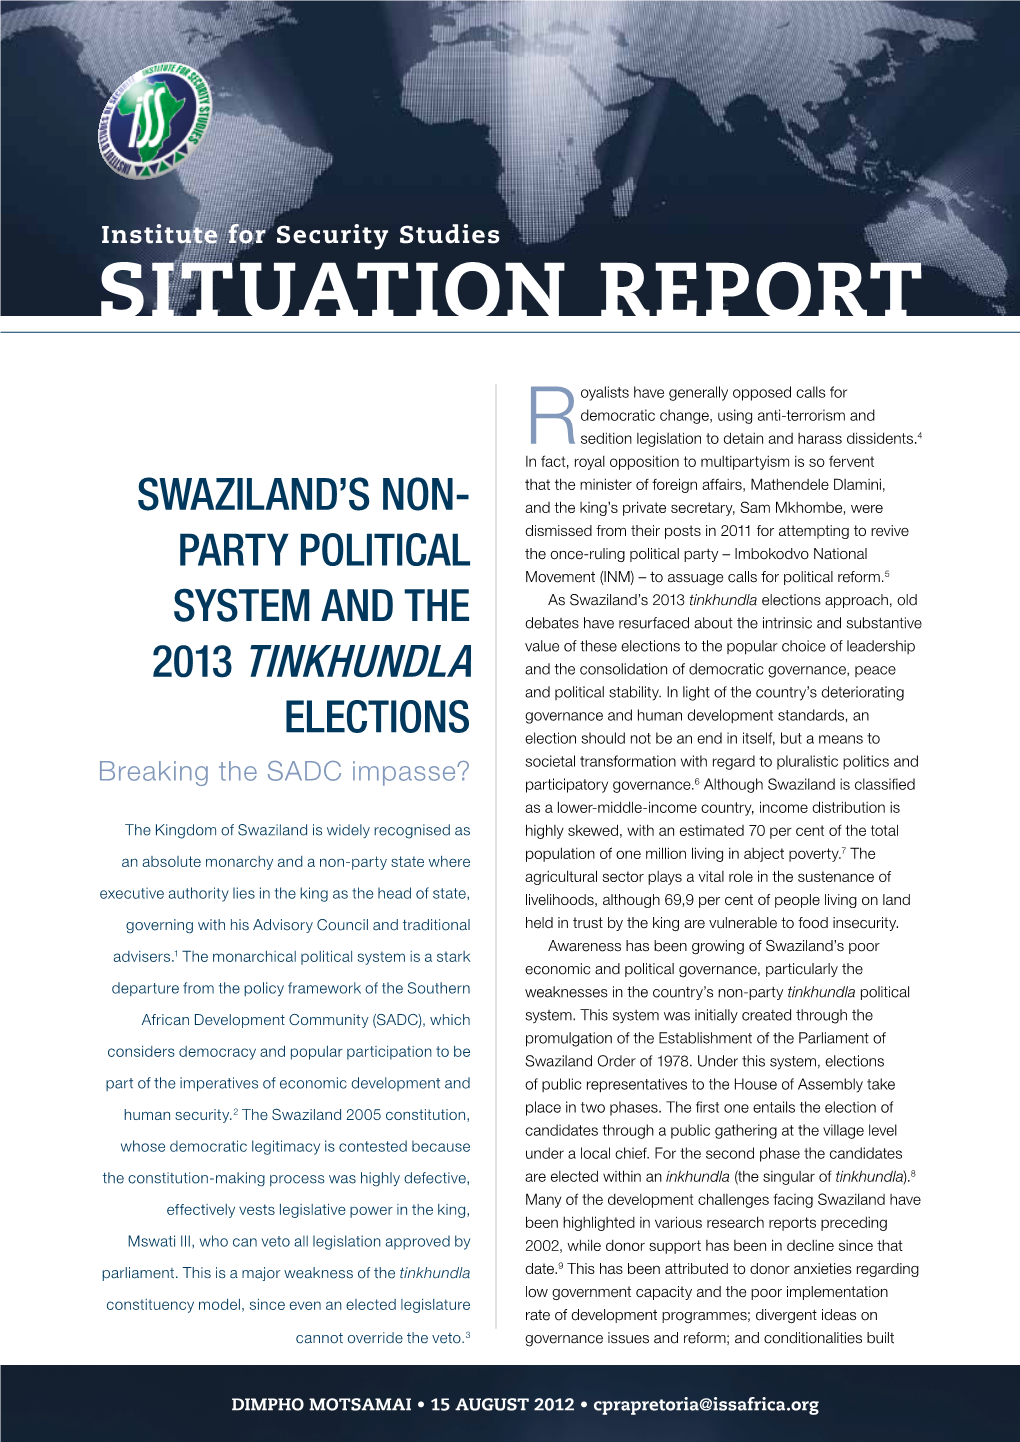 Swaziland's Non-Party Political System and the 2013 Tinkhundla